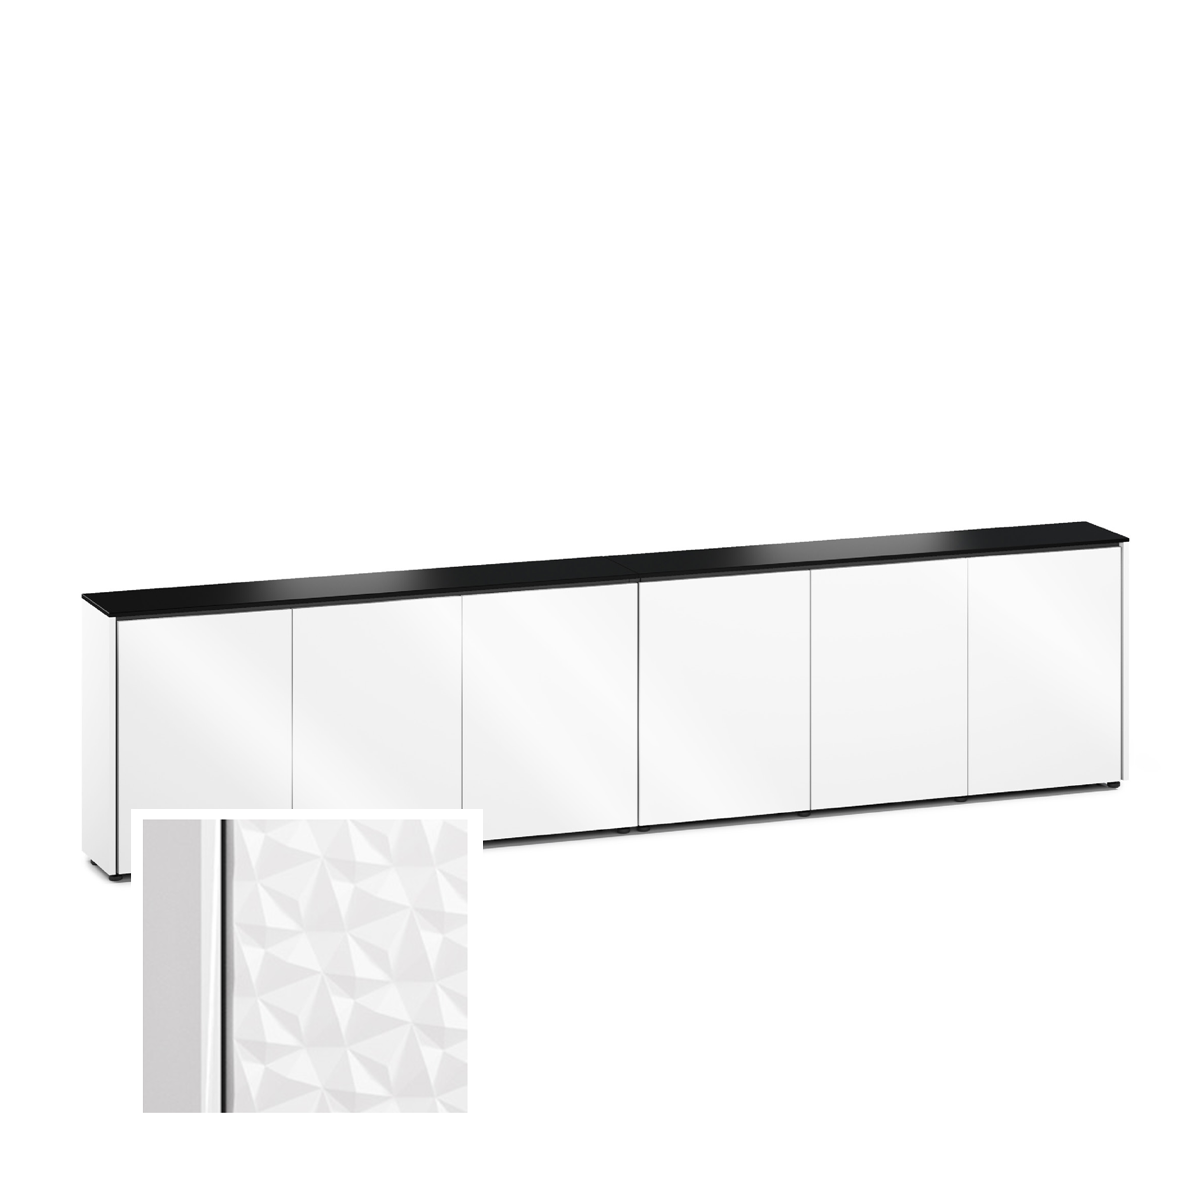 D1/367A/ML/WH/WH 6 Bay Low-Profile, Wall Cabinet, Milan- White / White Solid Surface